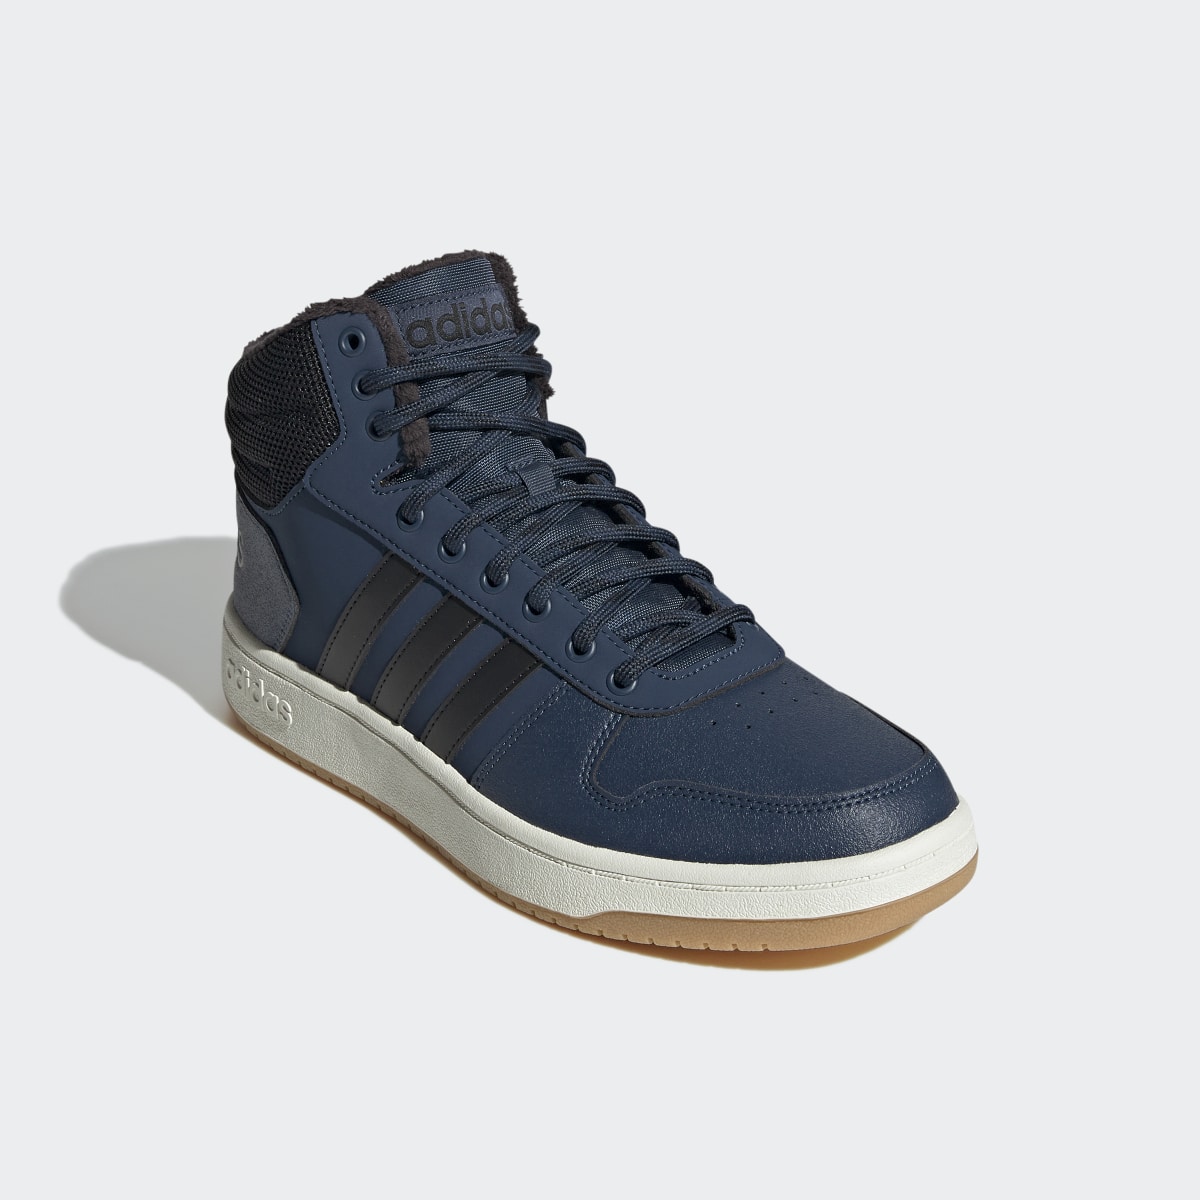 Adidas Hoops 2.0 Mid Shoes. 5